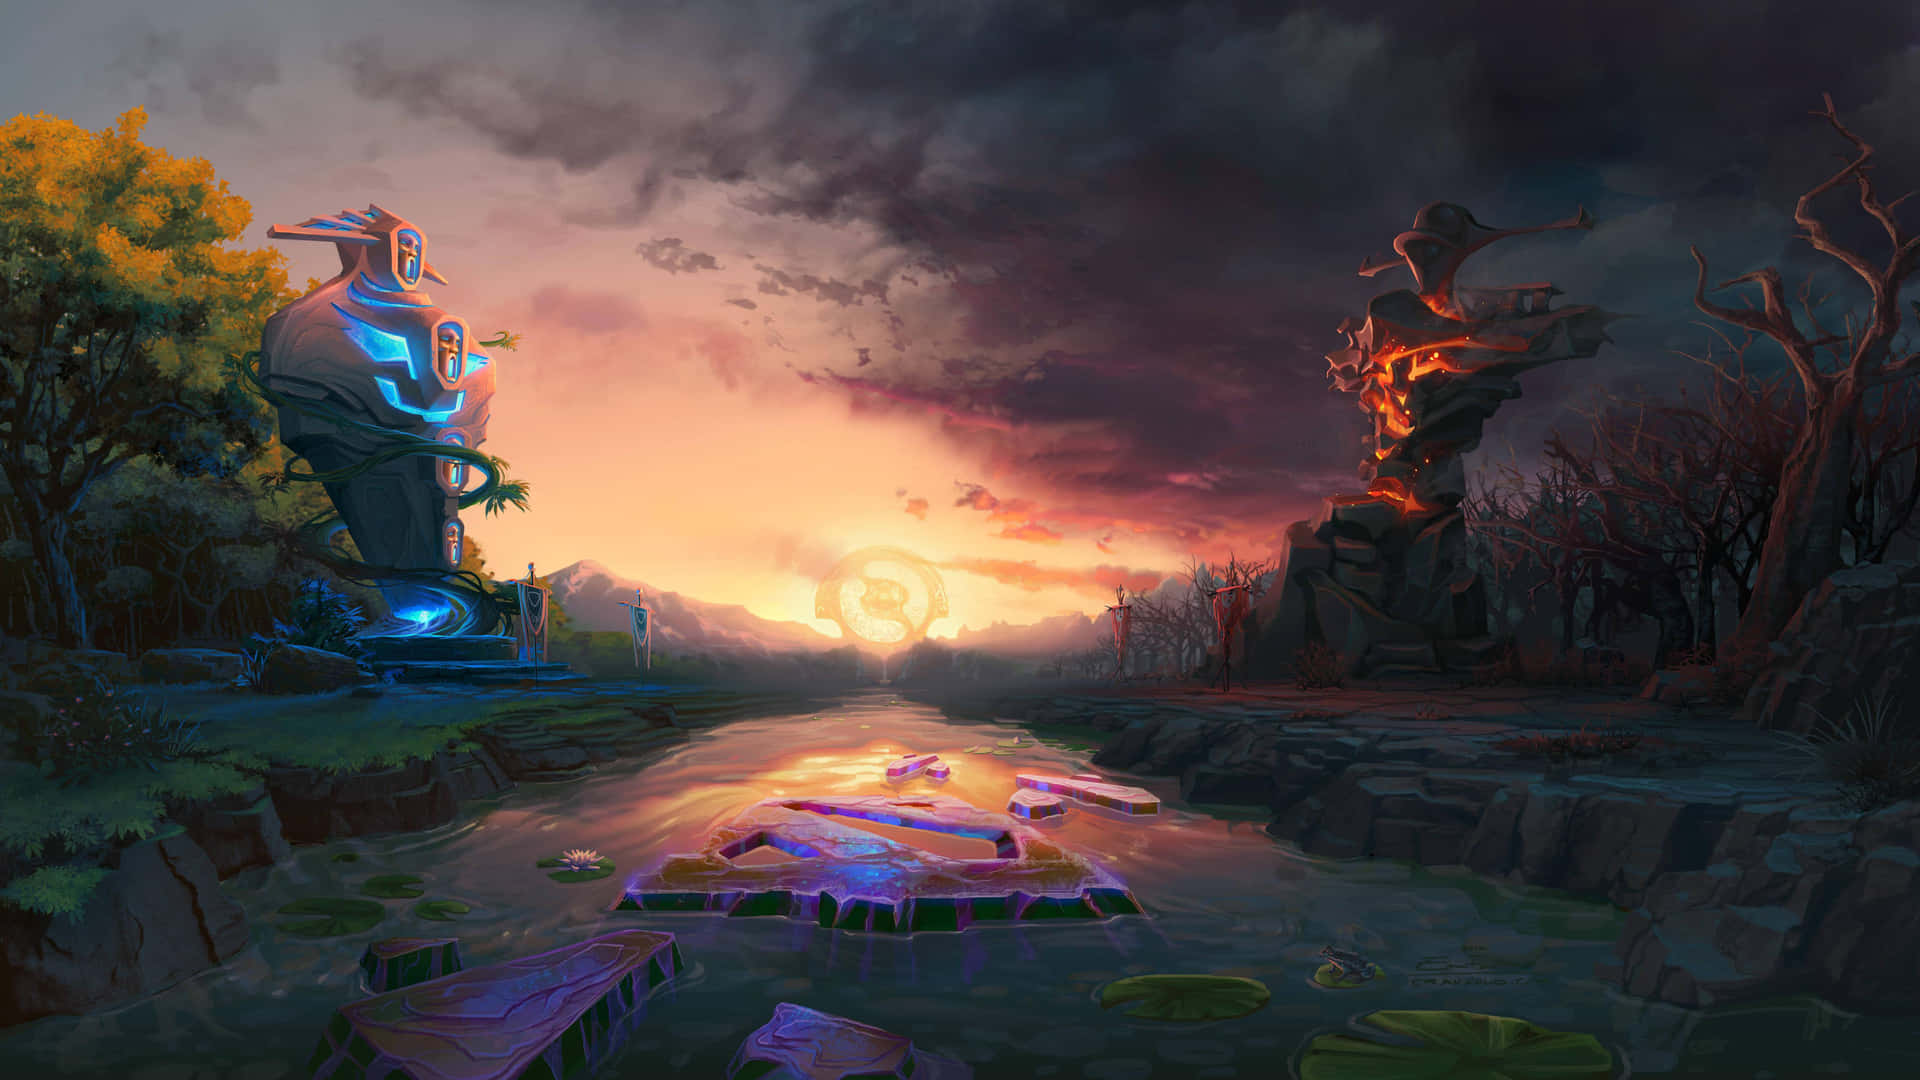 Get ready for epic battles in Dota 2!